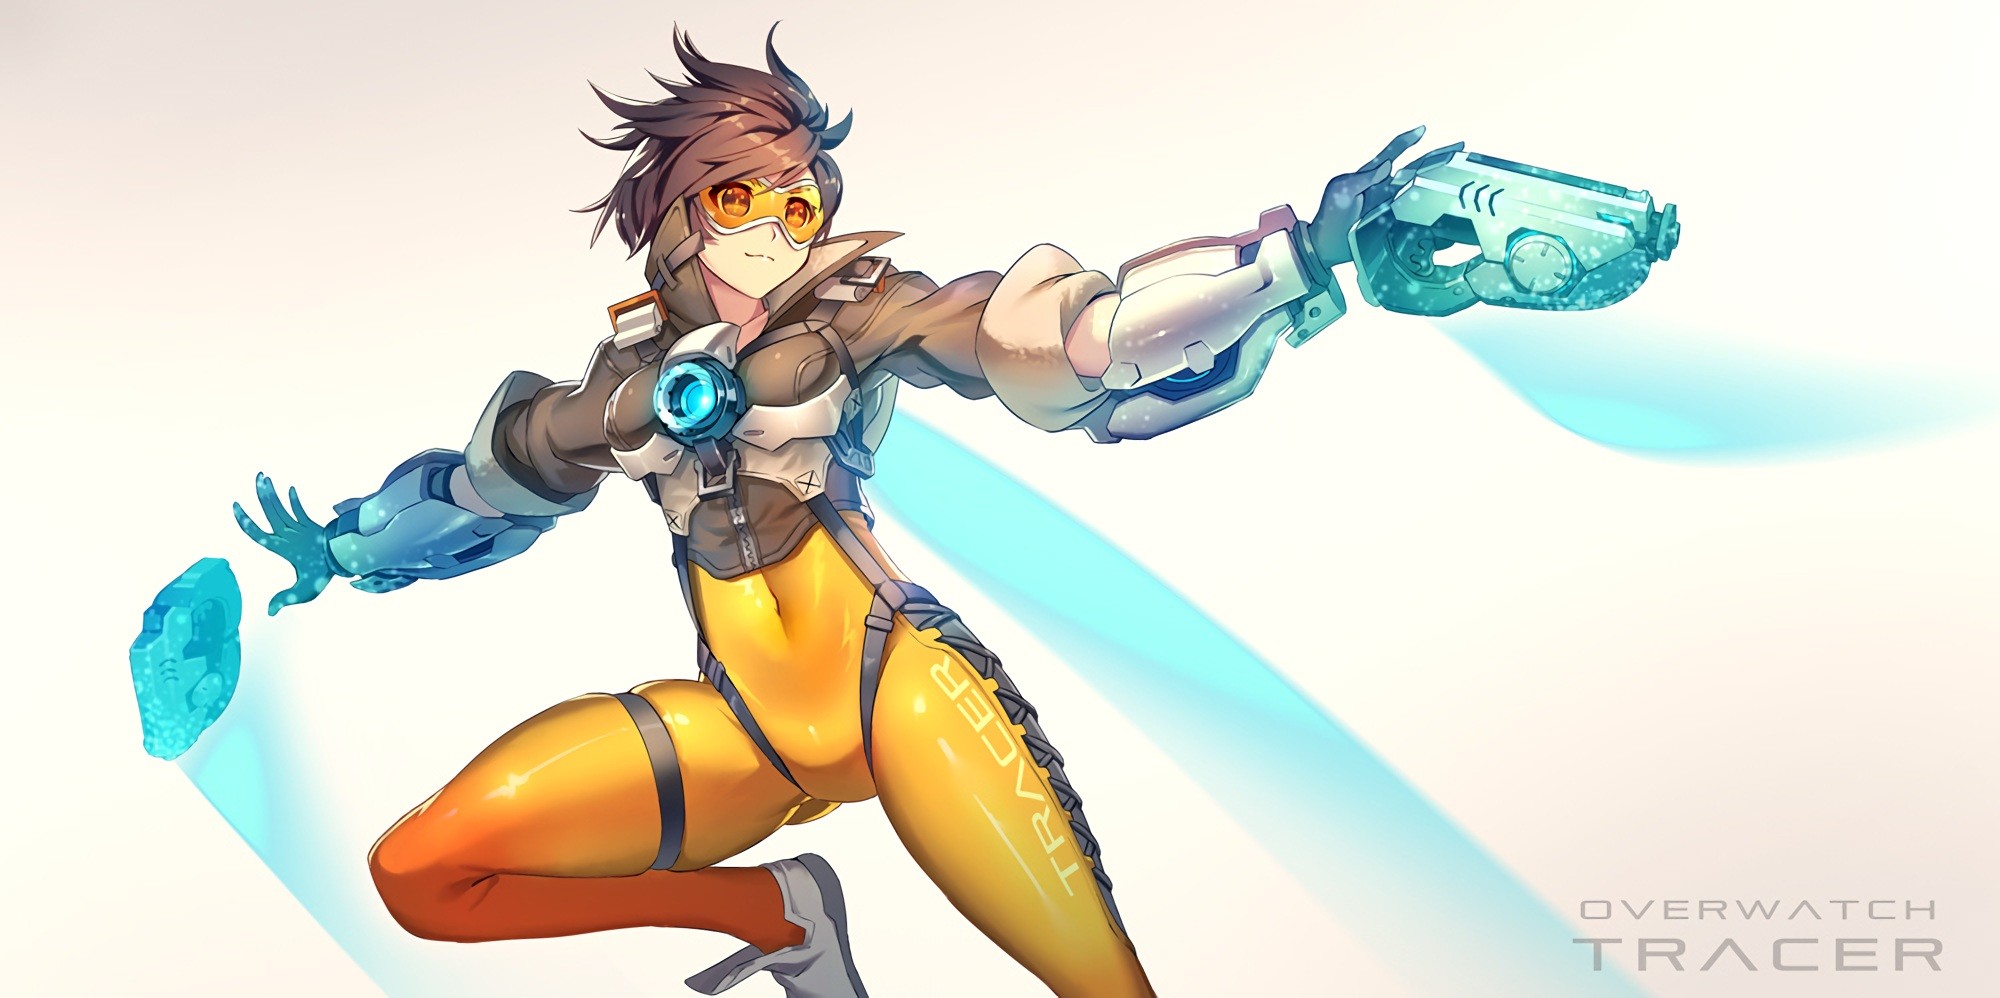 Anime 2000x998 anime anime girls Overwatch Tracer (Overwatch) armor bodysuit short hair gloves gun weapon cyan video game girls women video game characters PC gaming girls with guns white background simple background goggles